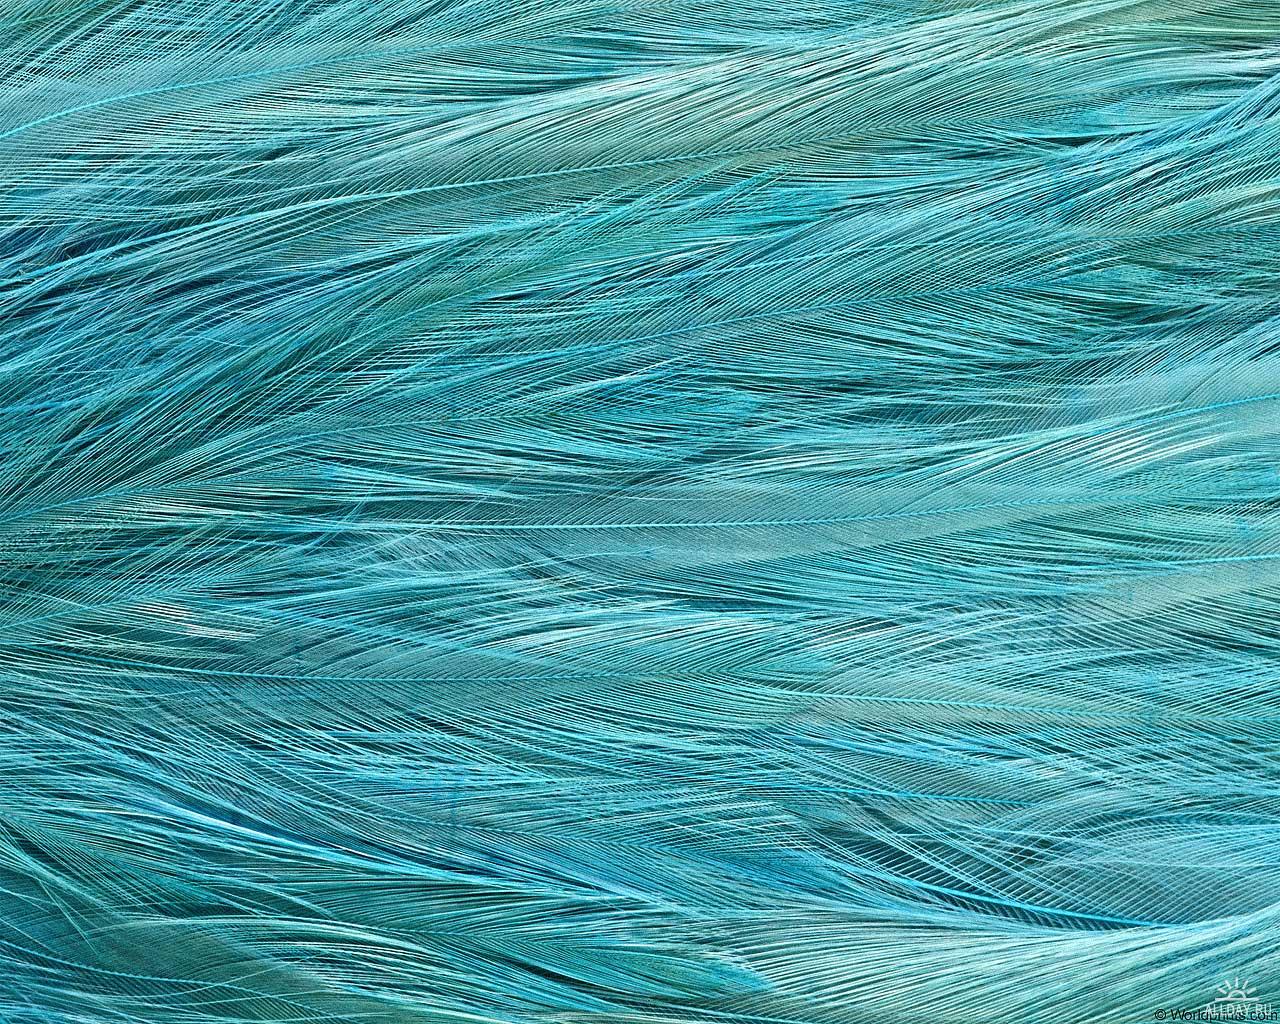 blue , texture feather, download background, photo, image, blue feather background texture